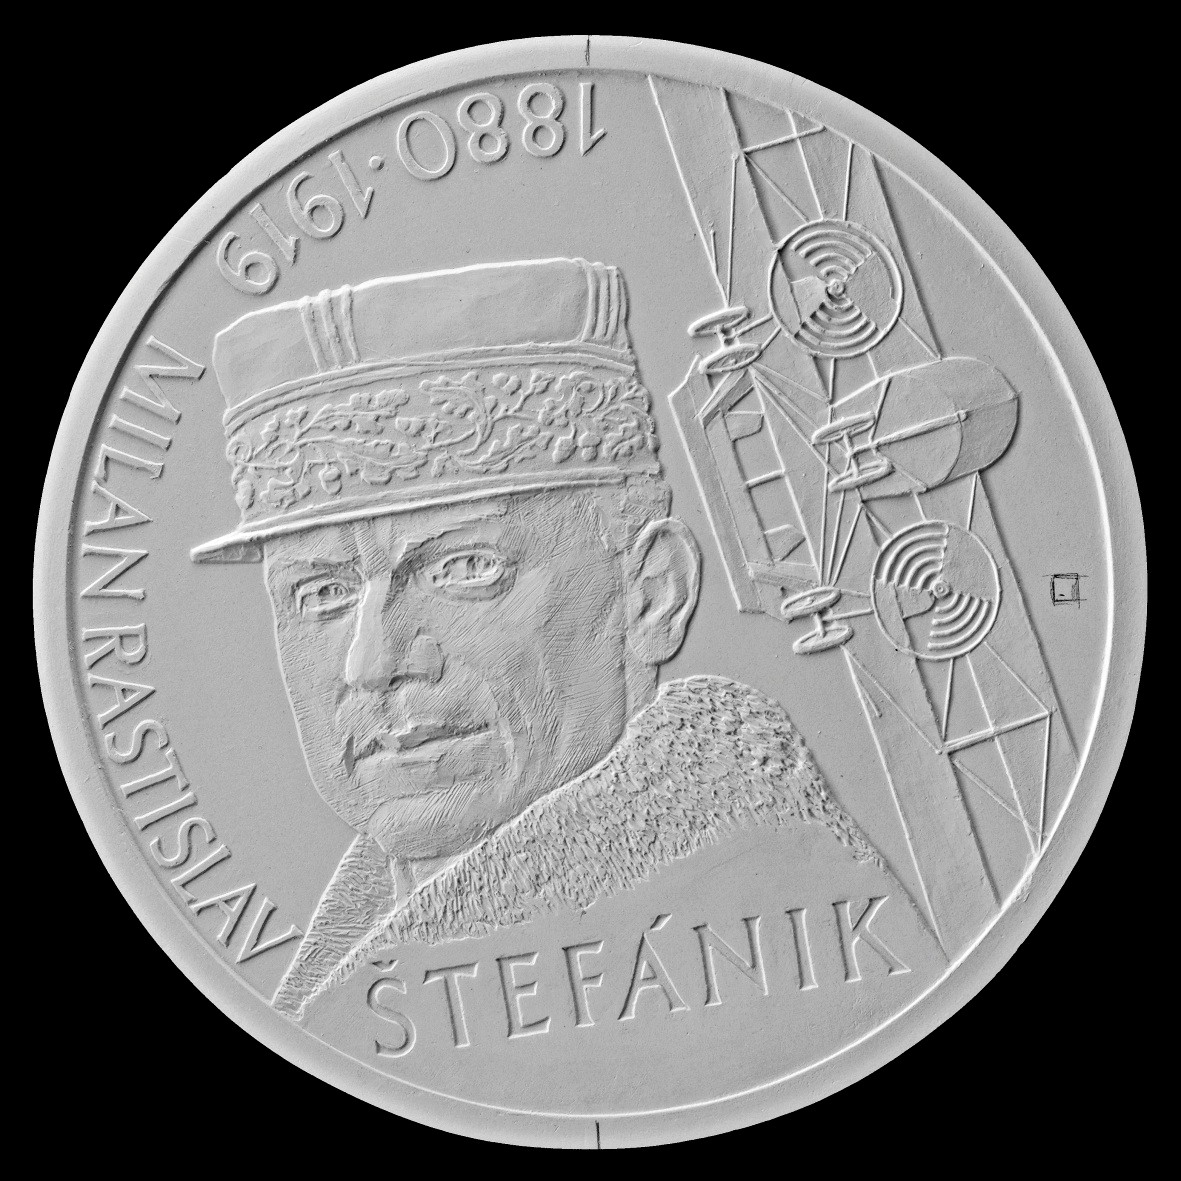 Reduced first prize and the design selected for the coin’s reverse